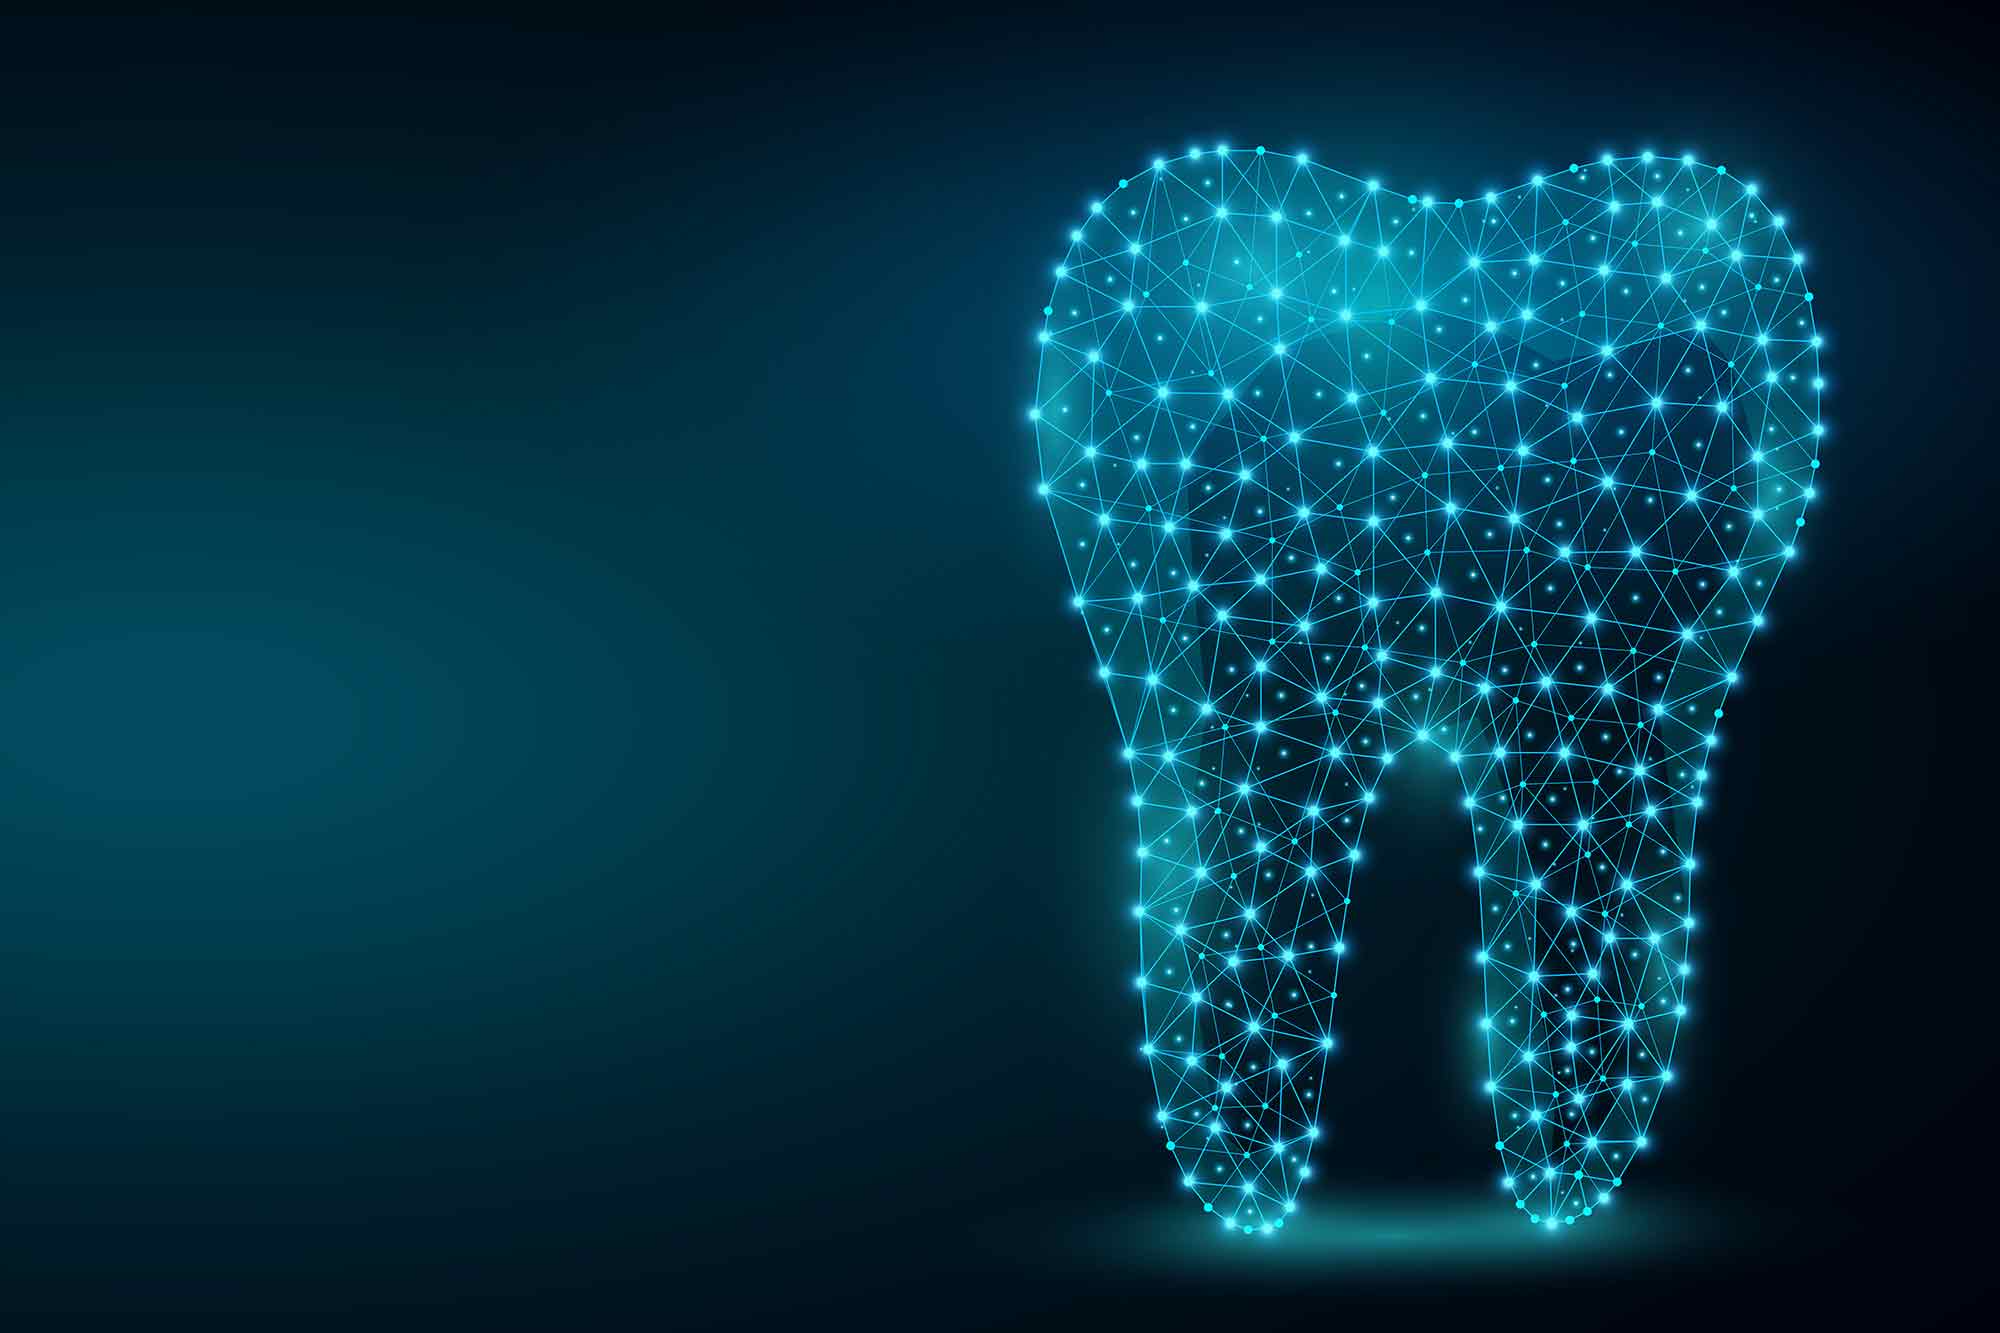 Artificial intelligence systems are able to identify tooth decay more accurately than human dentists, new research suggests